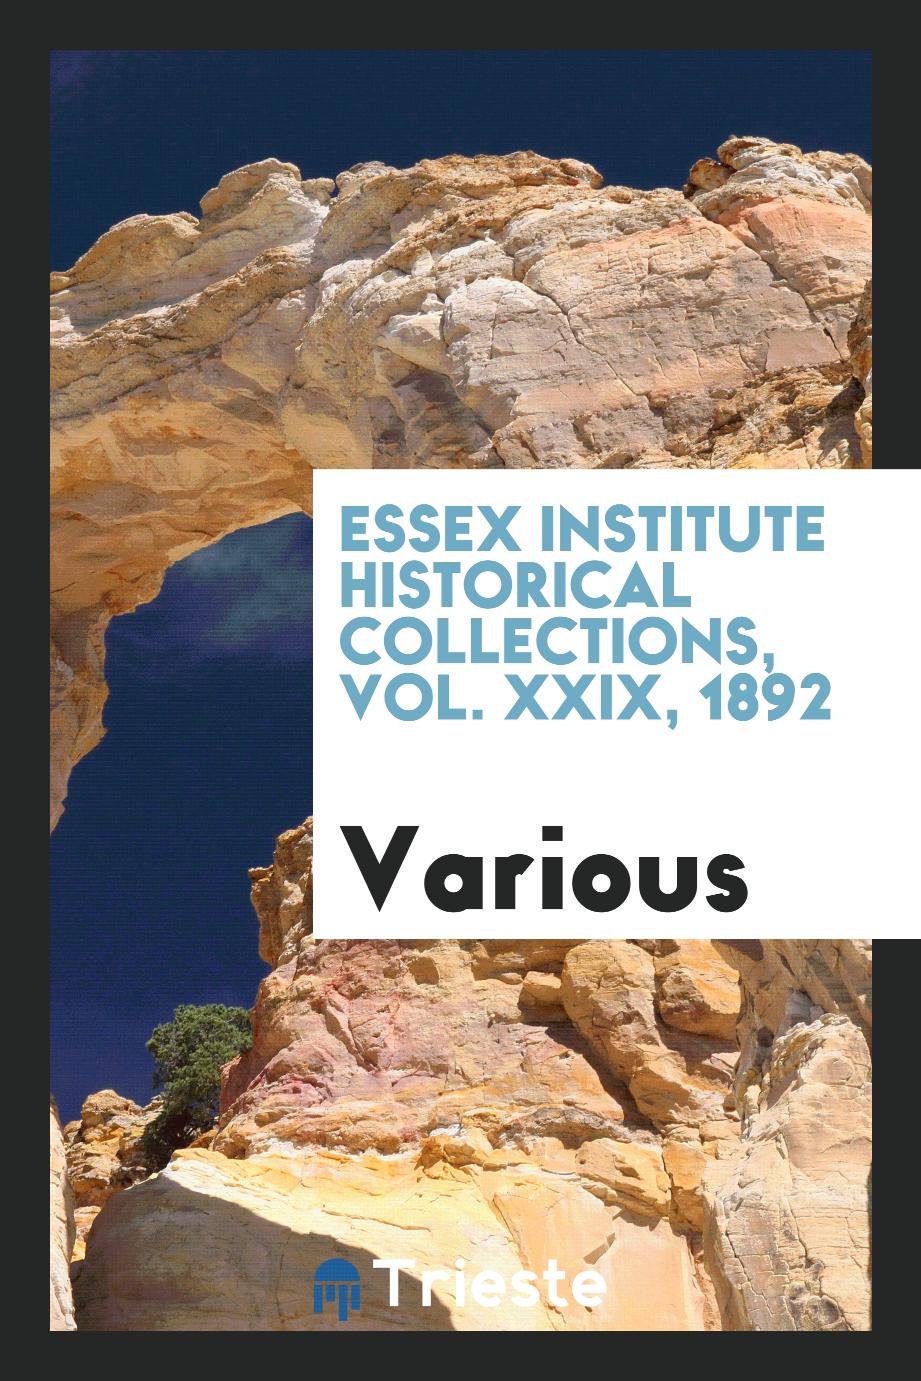 Essex Institute historical collections, Vol. XXIX, 1892